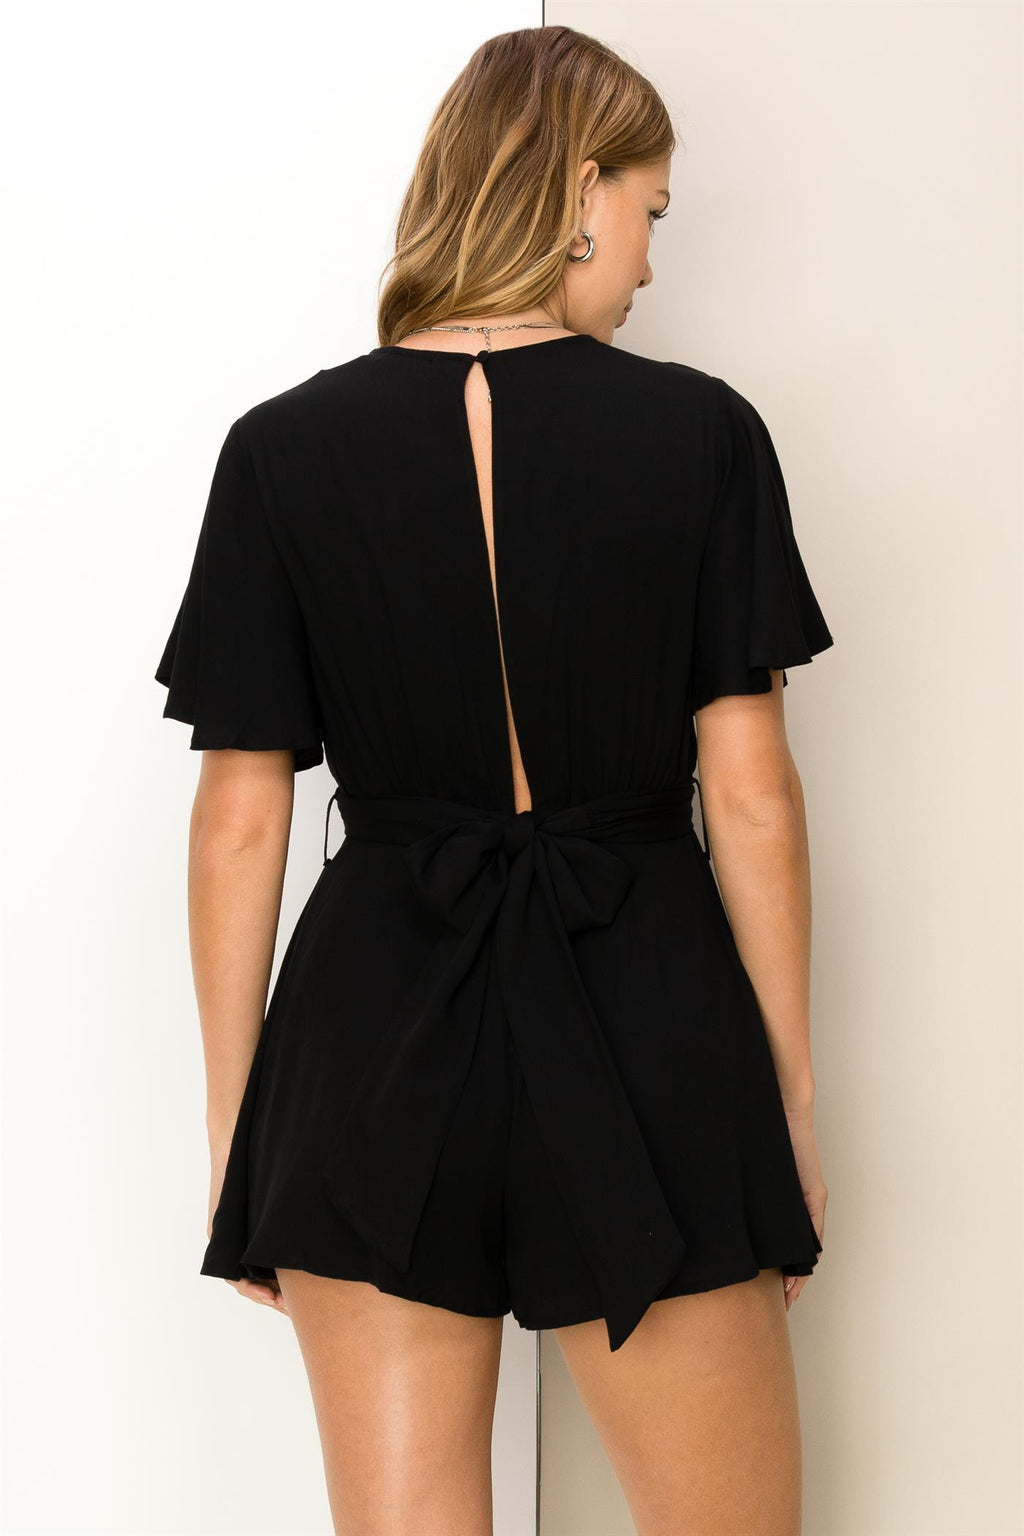 flutter sleeve tie back black romper with a v neck line and criss cross front detail